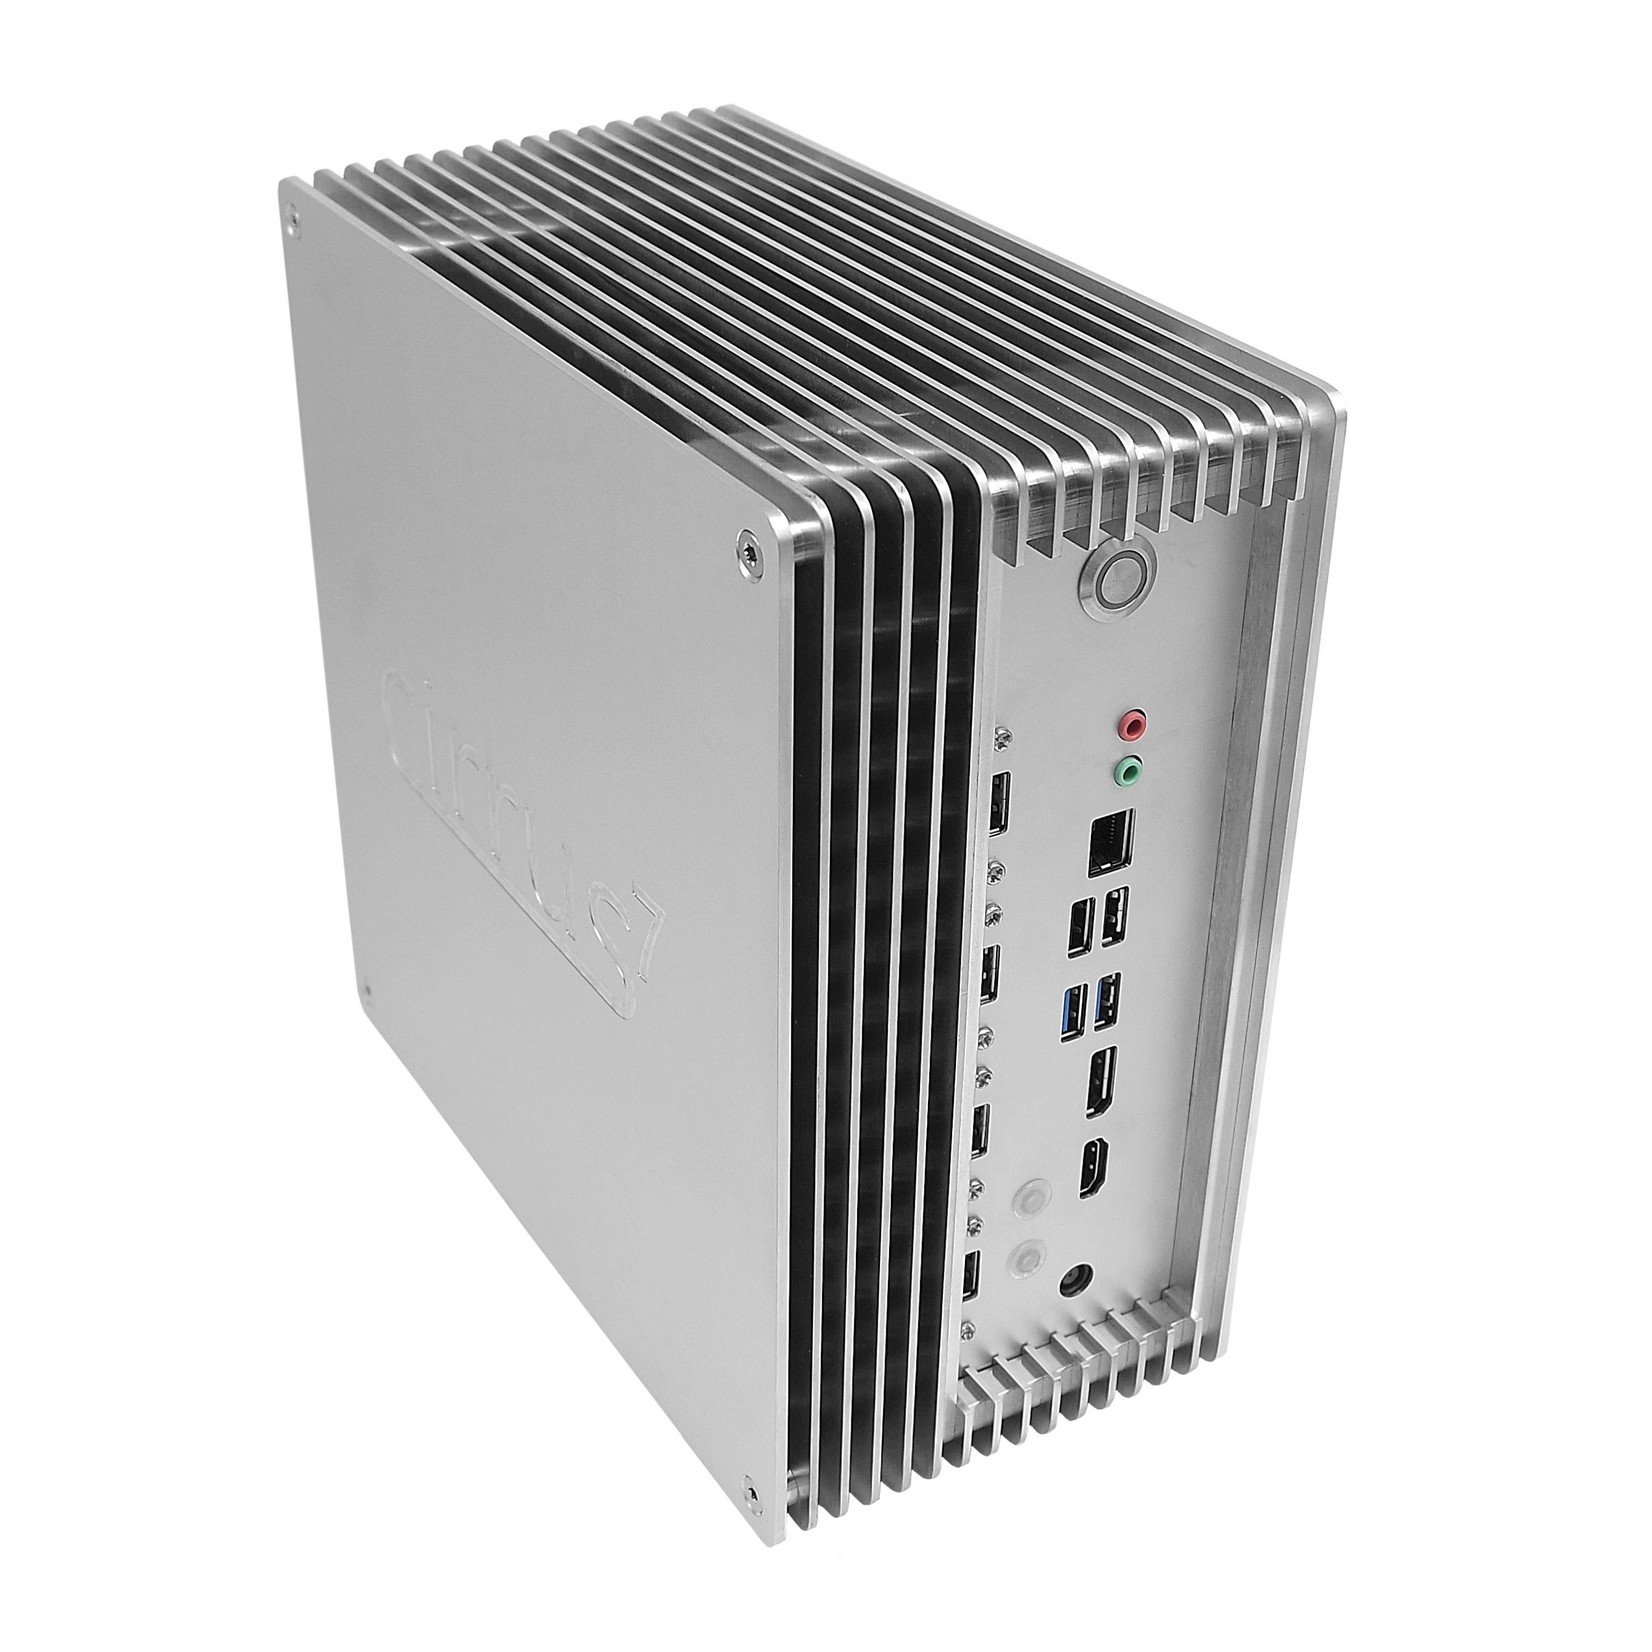 Cirrus7 the completely silent PC through fanless cooling